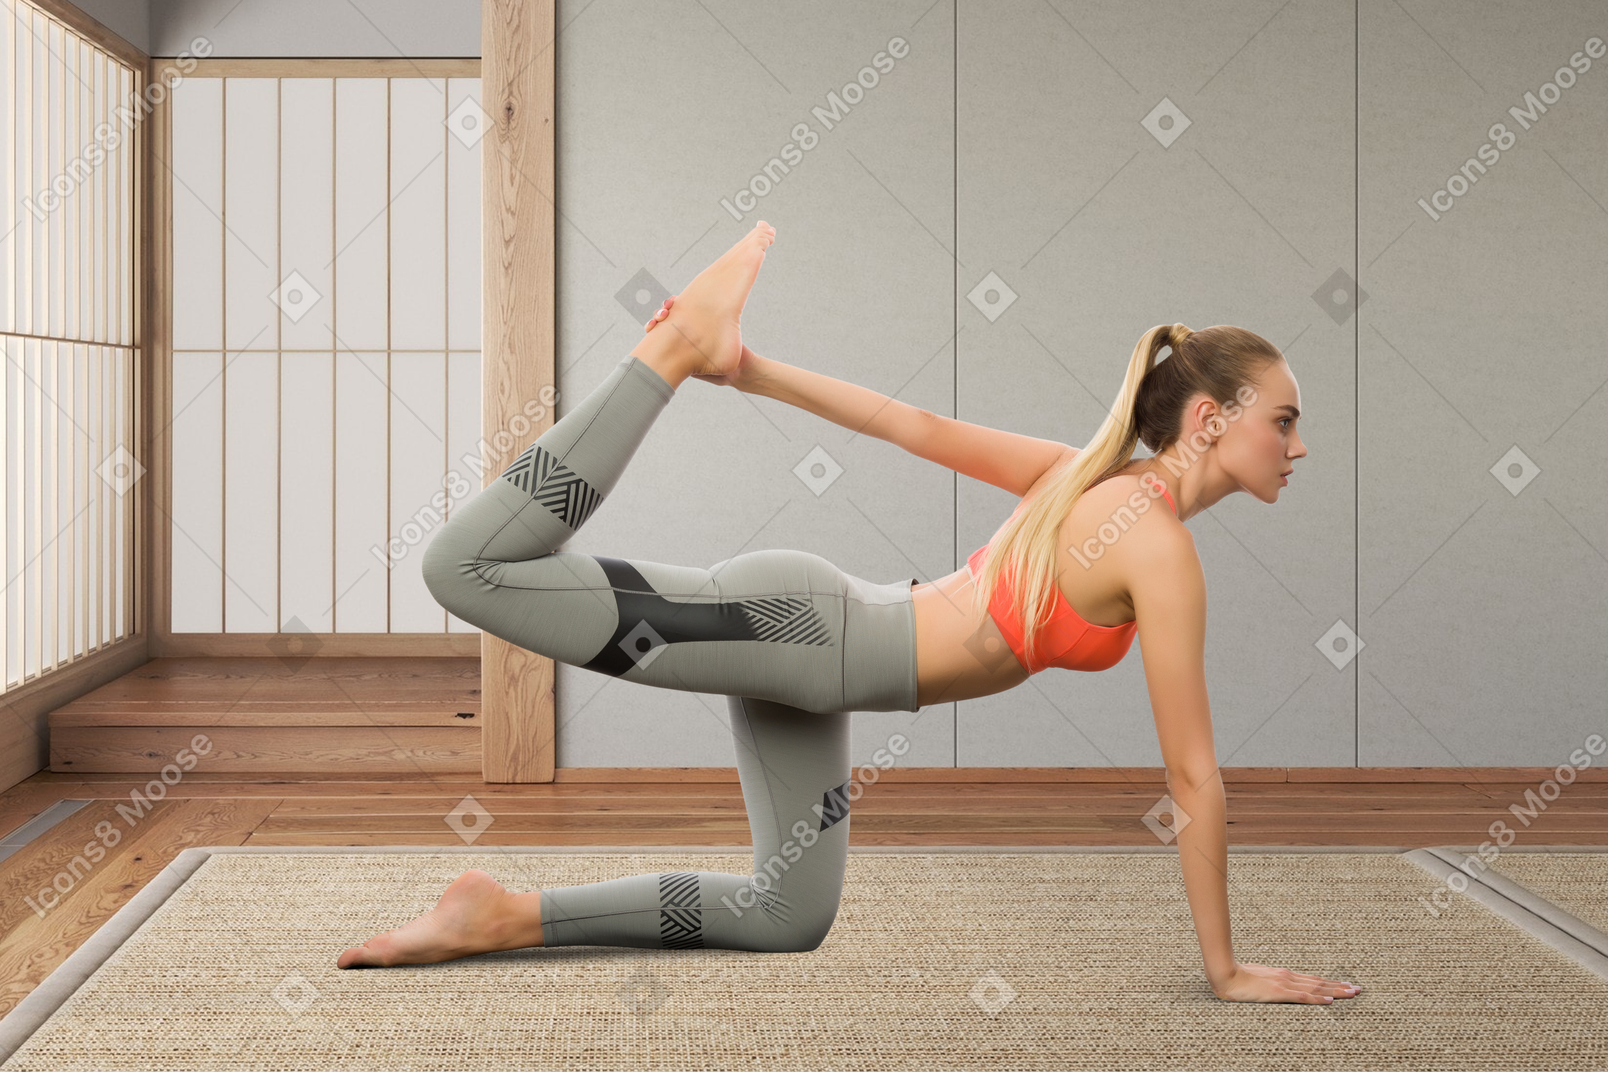 A woman doing a yoga pose in a room